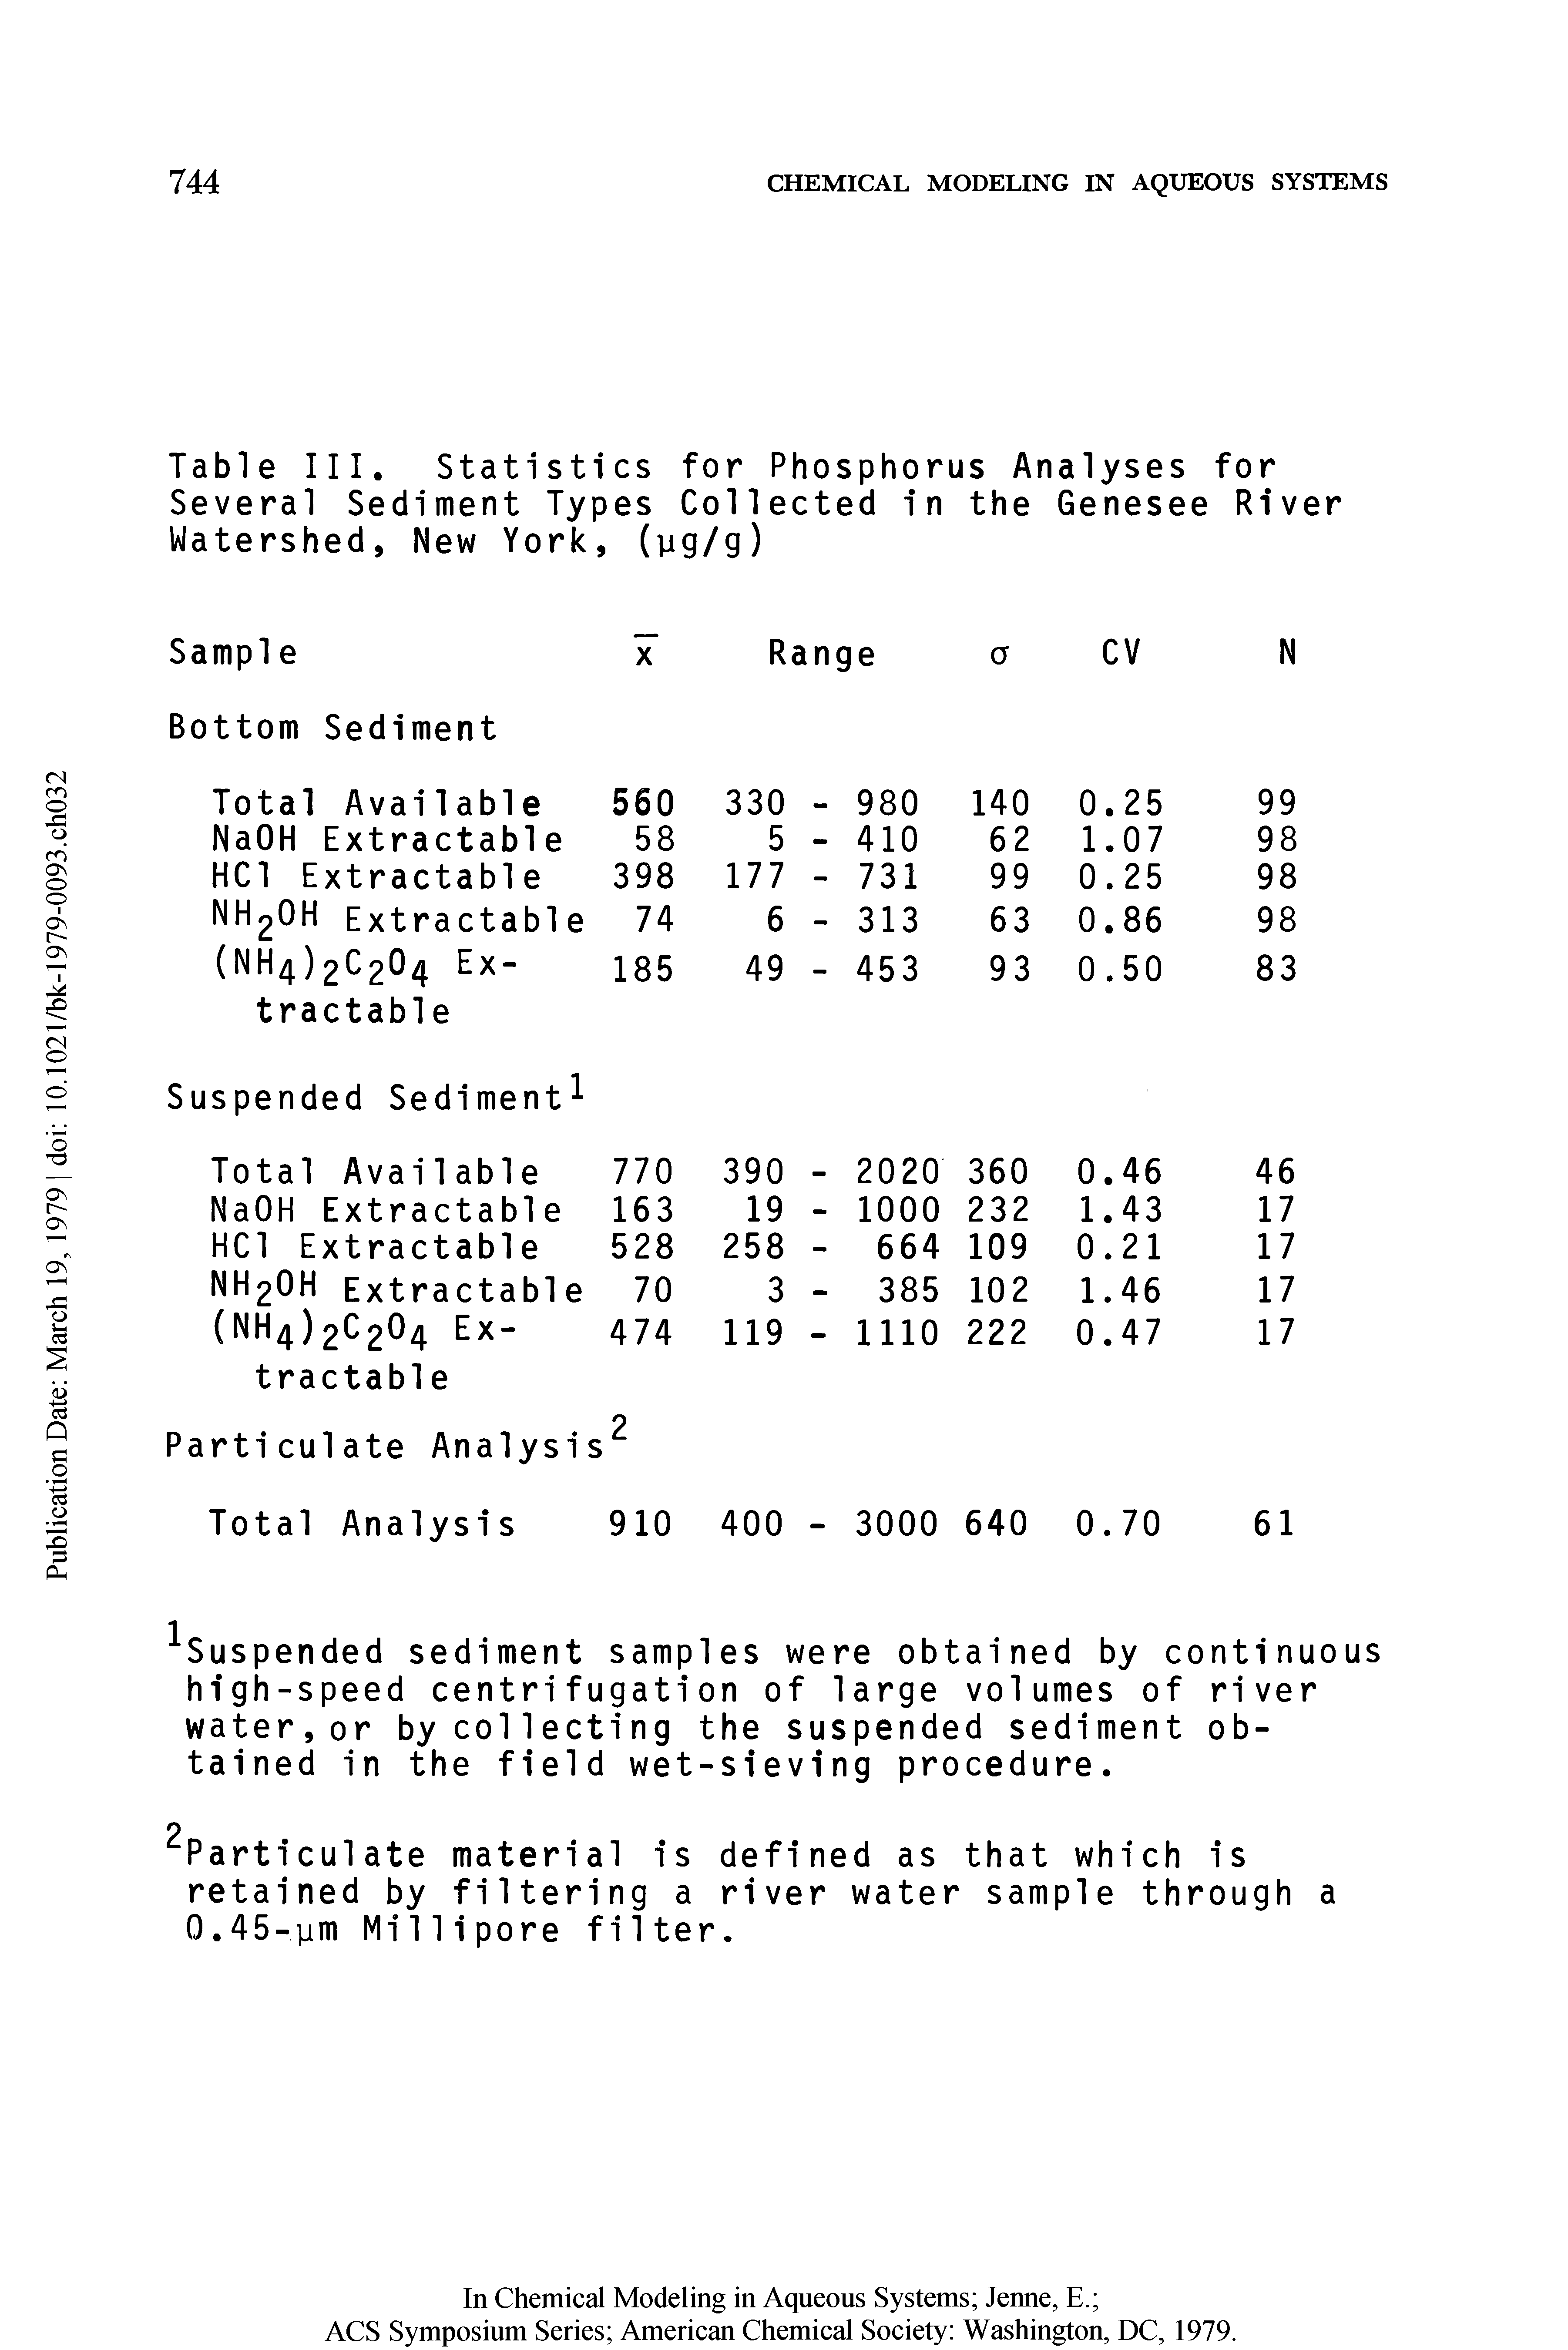 Table III. Statistics for Phosphorus Analyses for Several Sediment Types Collected in the Genesee River Watershed, New York, (ug/g)...